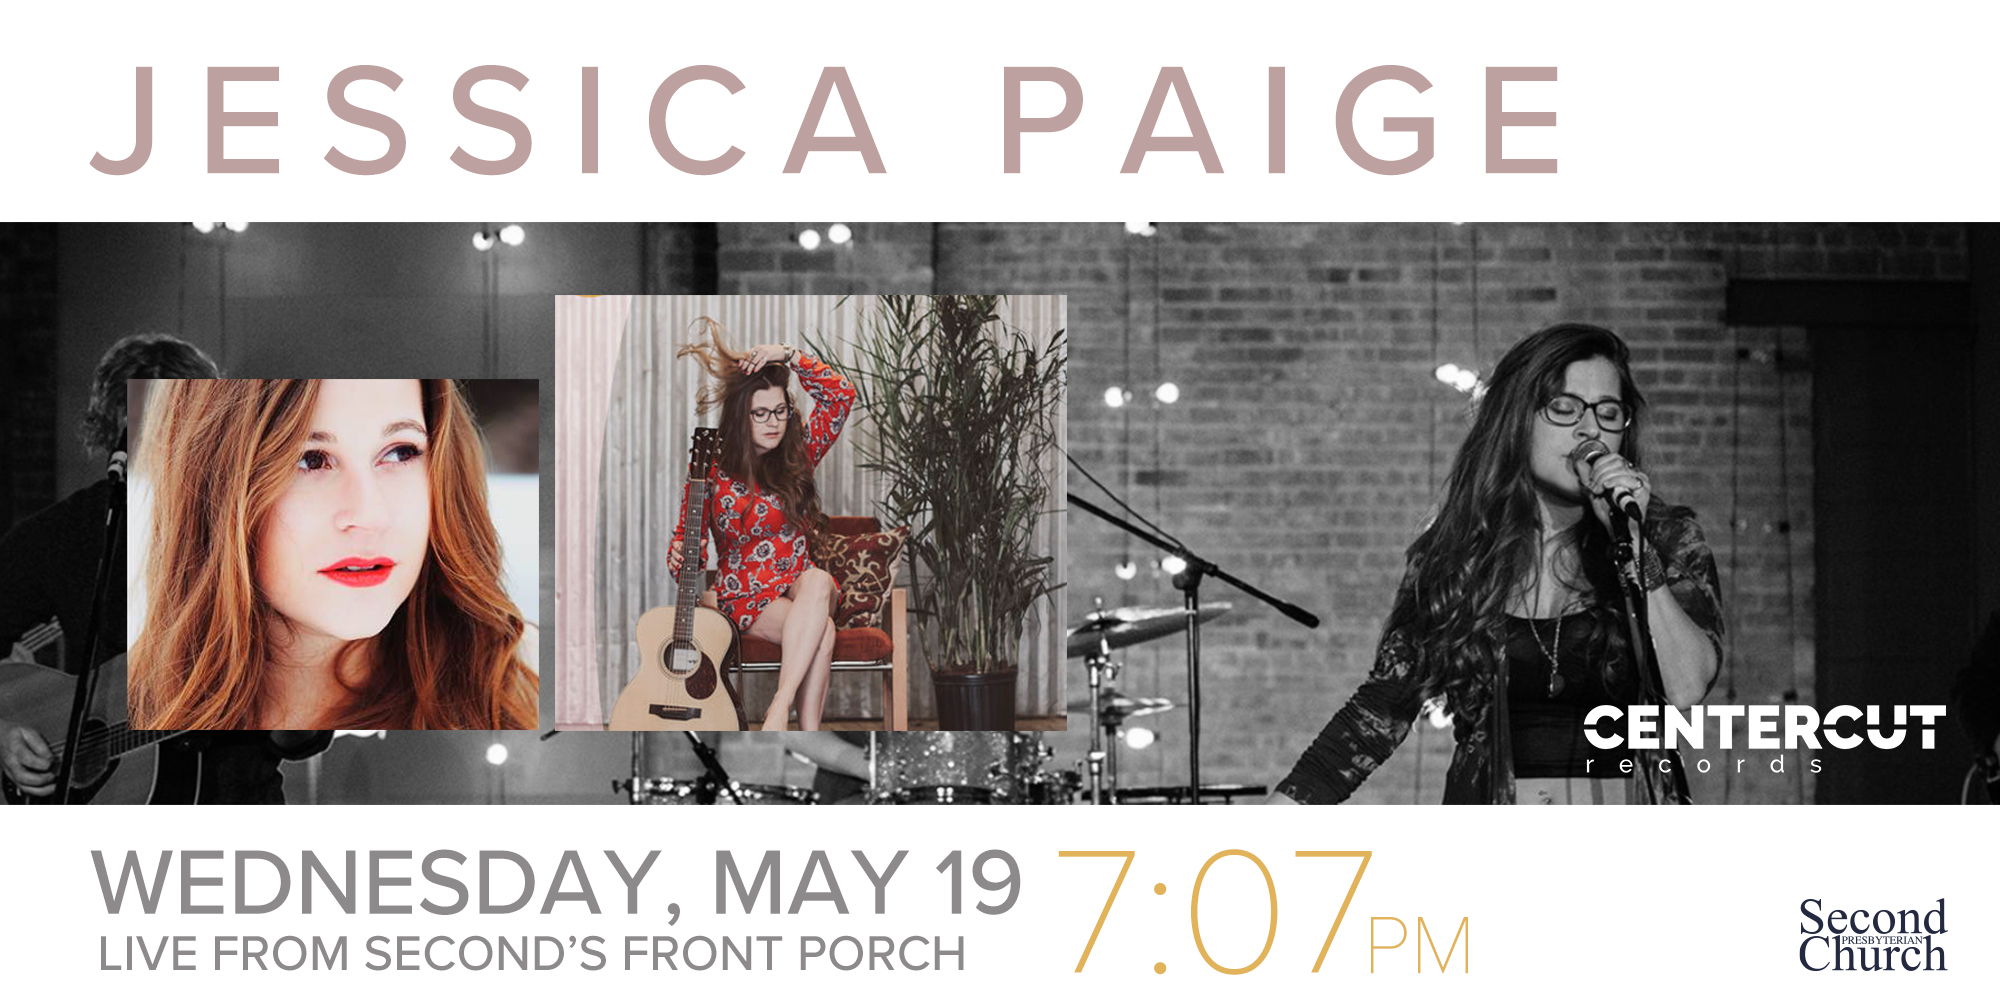 Jessica Paige - 7:07 Front Porch Concert at Second Presbyterian Church promotional image